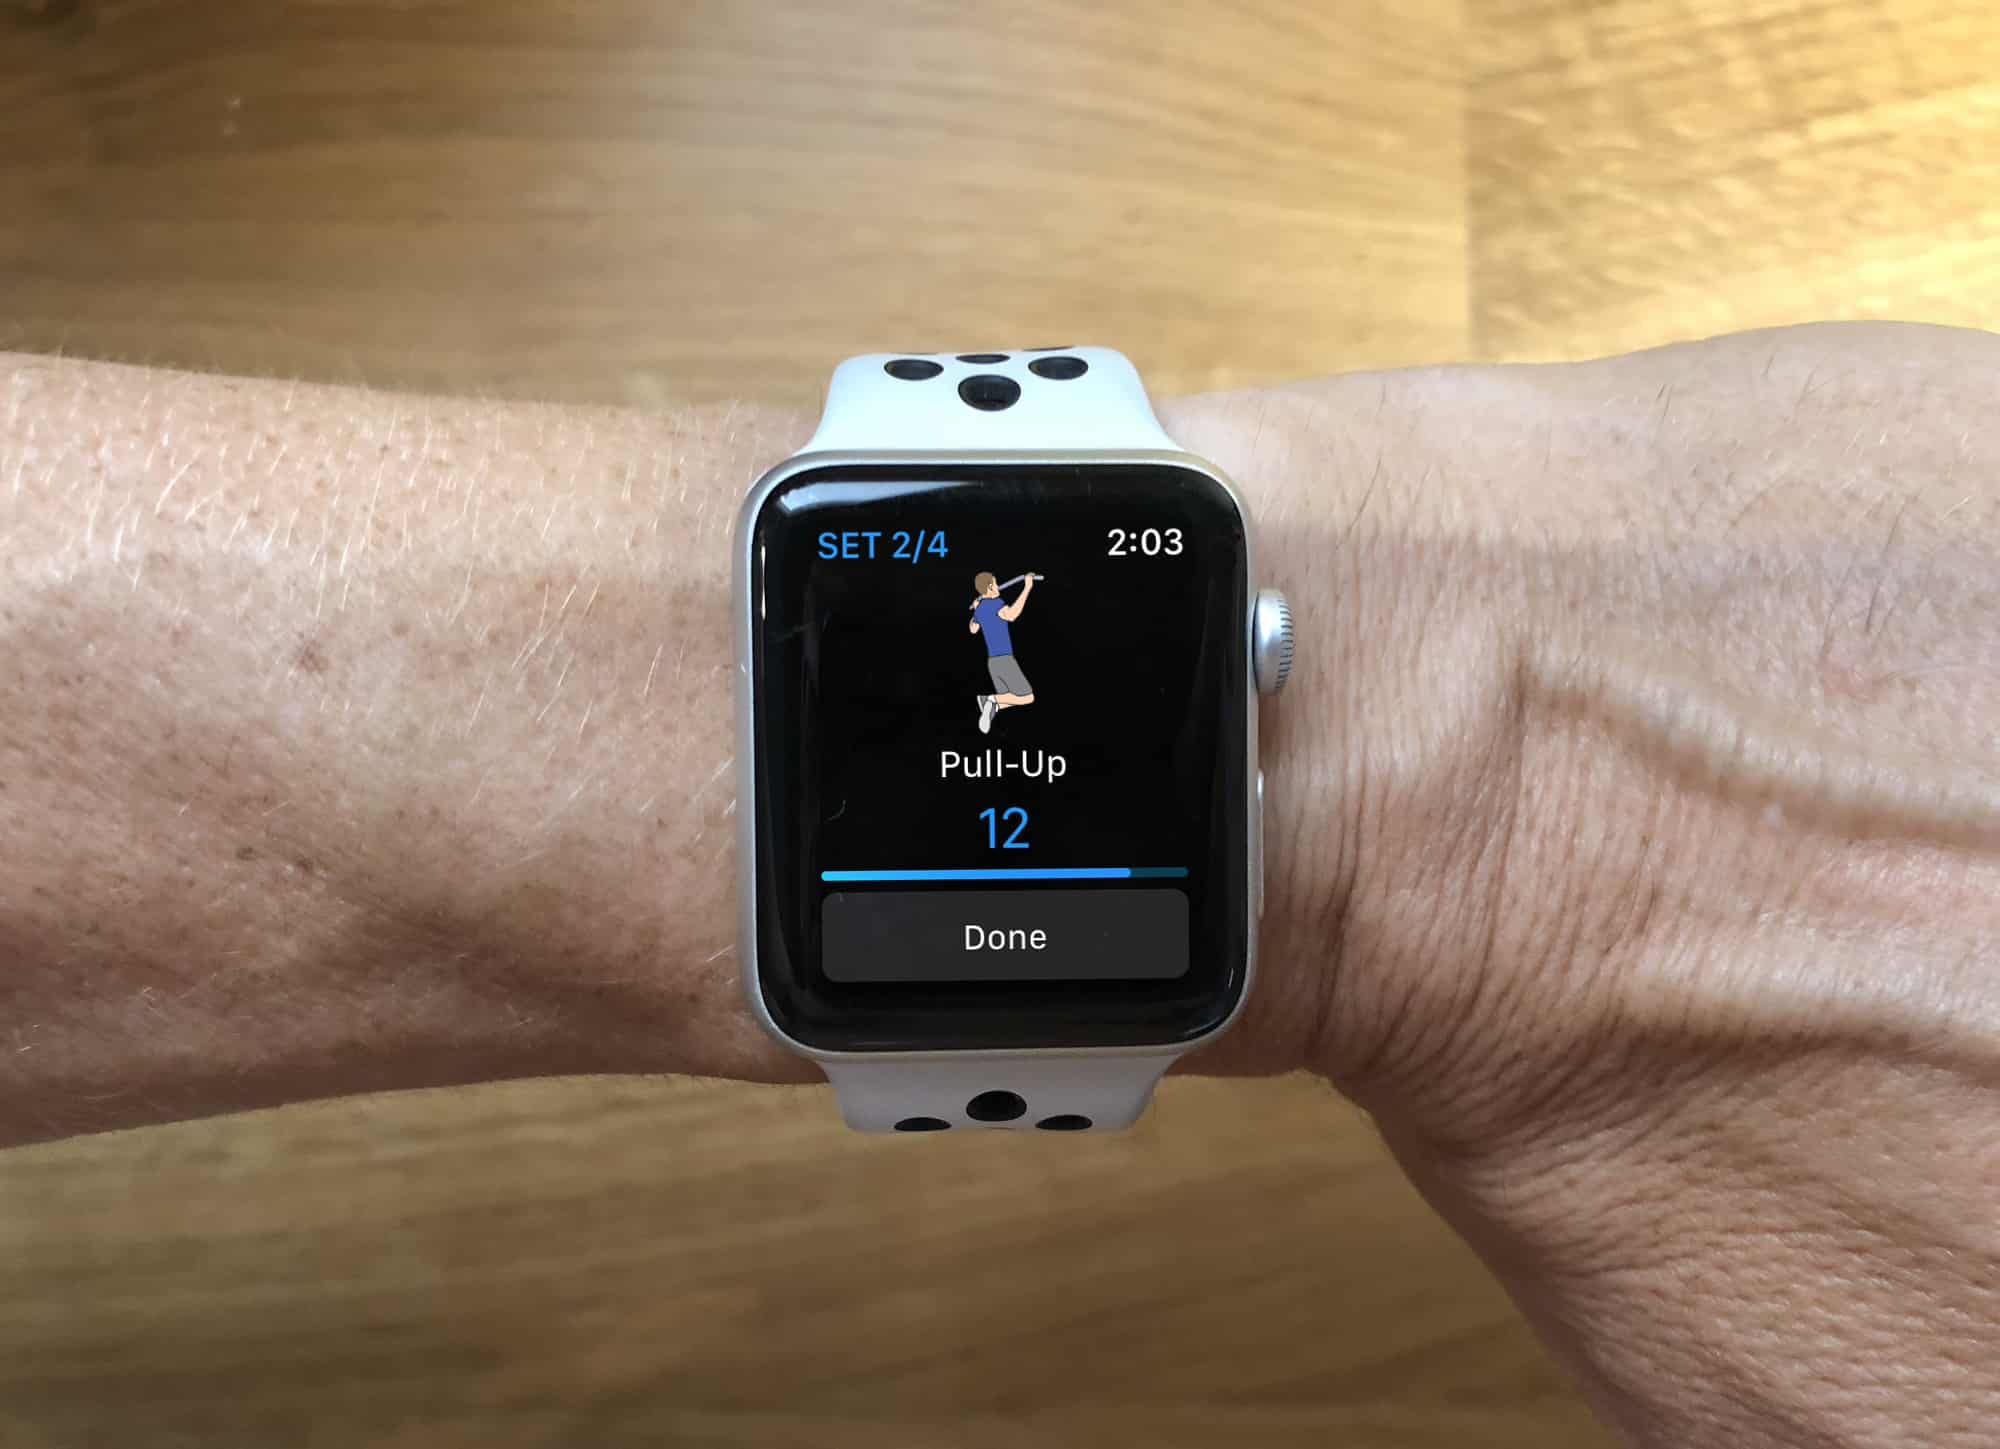 Fitness is one of the few categories where third-party Watch apps are genuinely useful